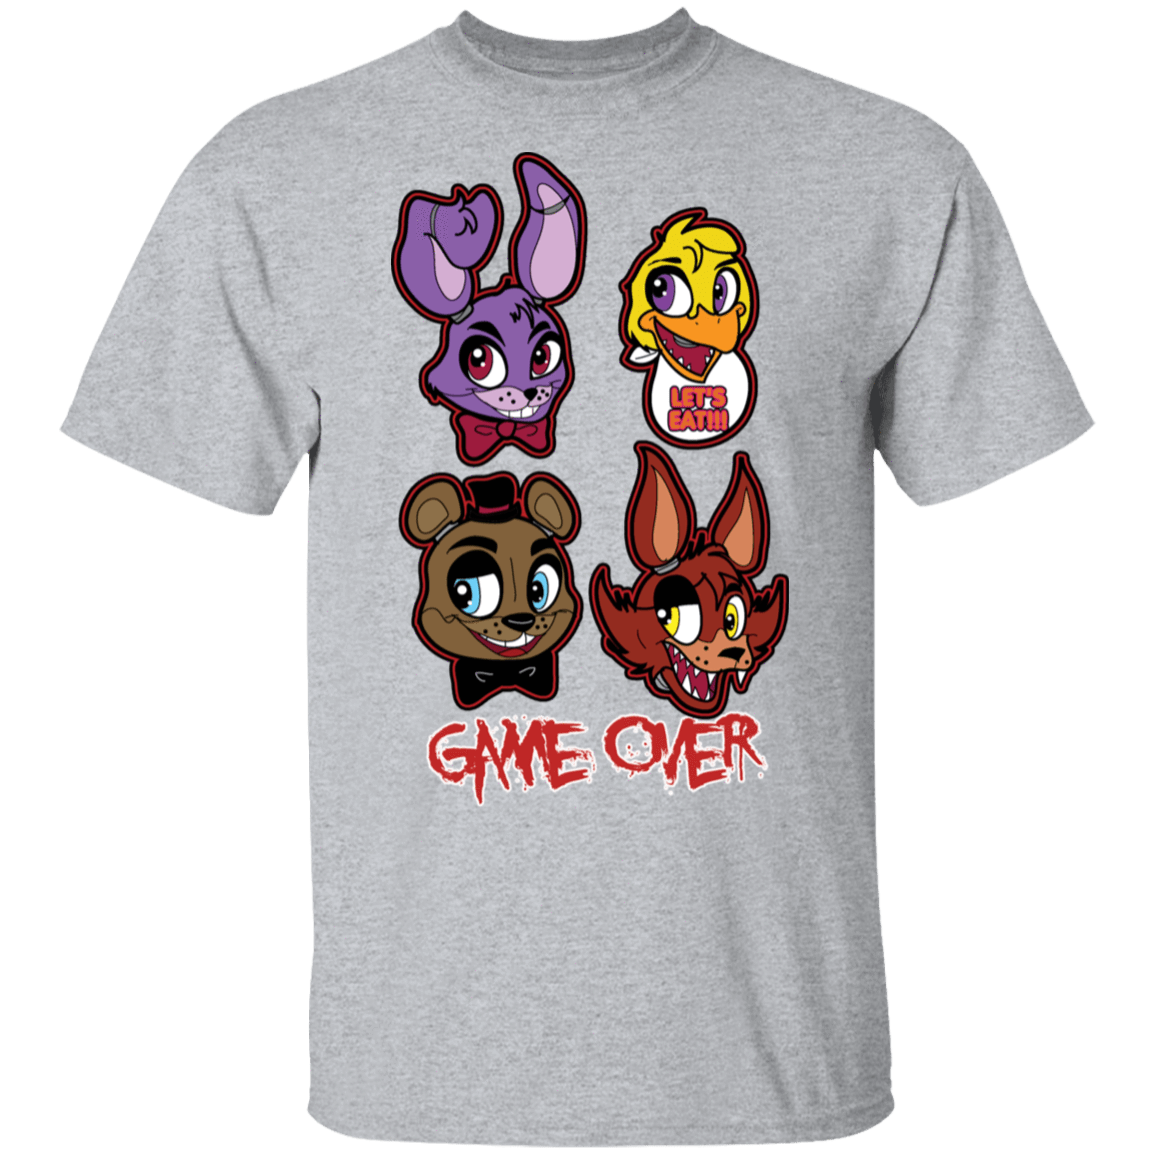 T-Shirts Sport Grey / S Five Nights at Freddys Game Over T-Shirt